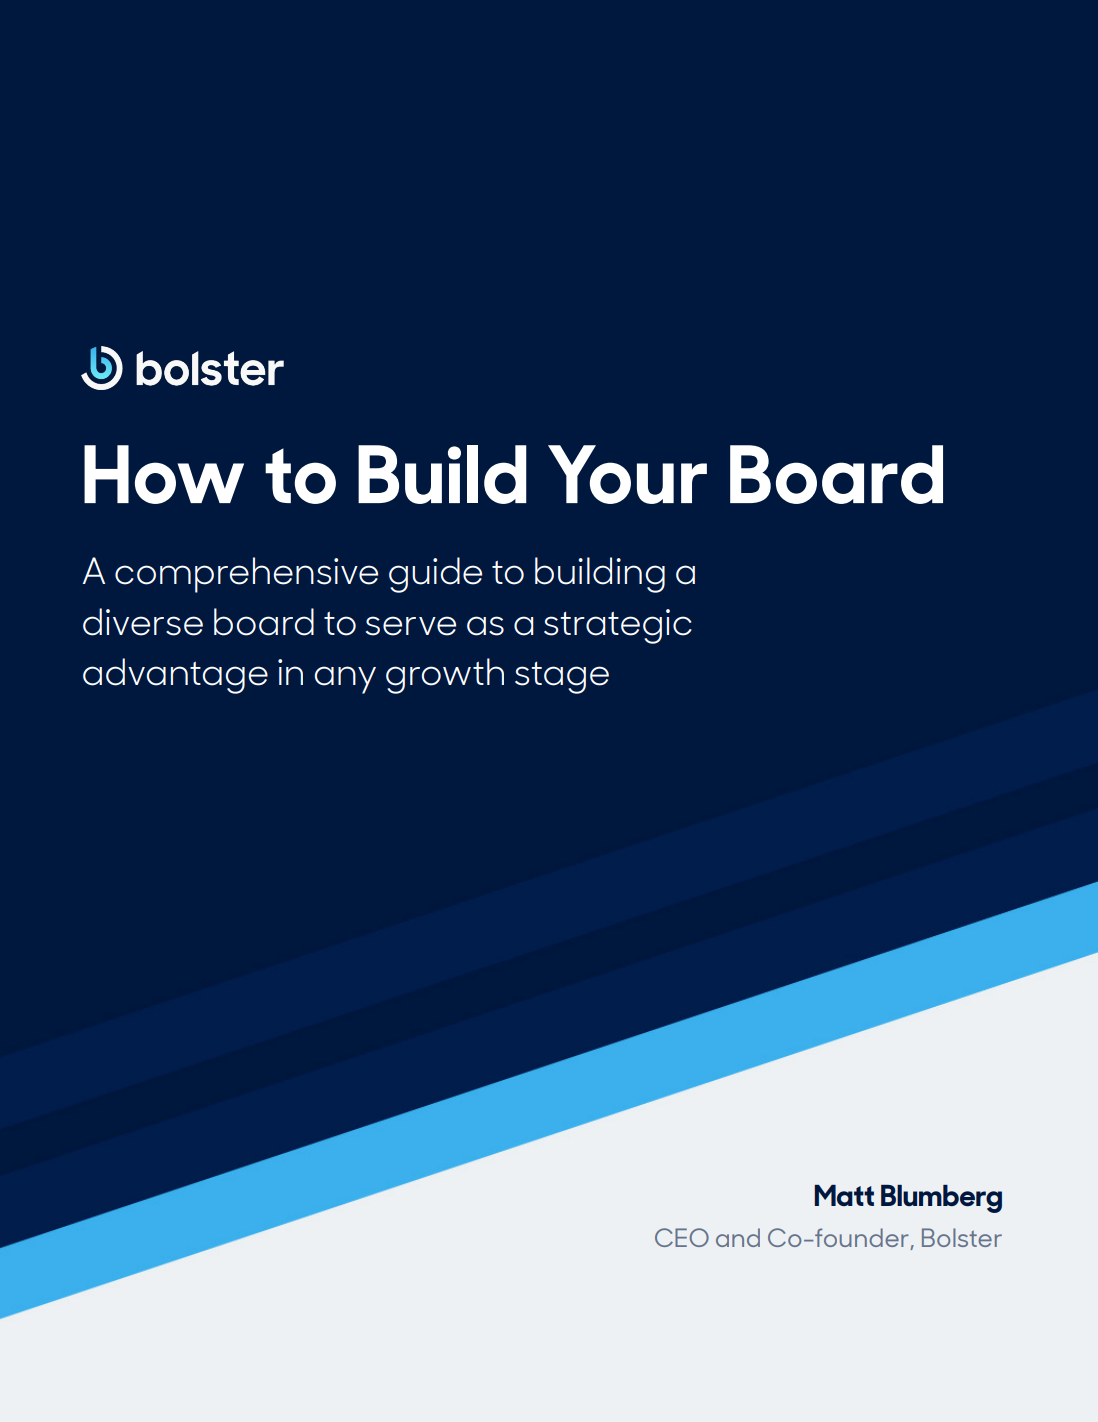 How to build your board